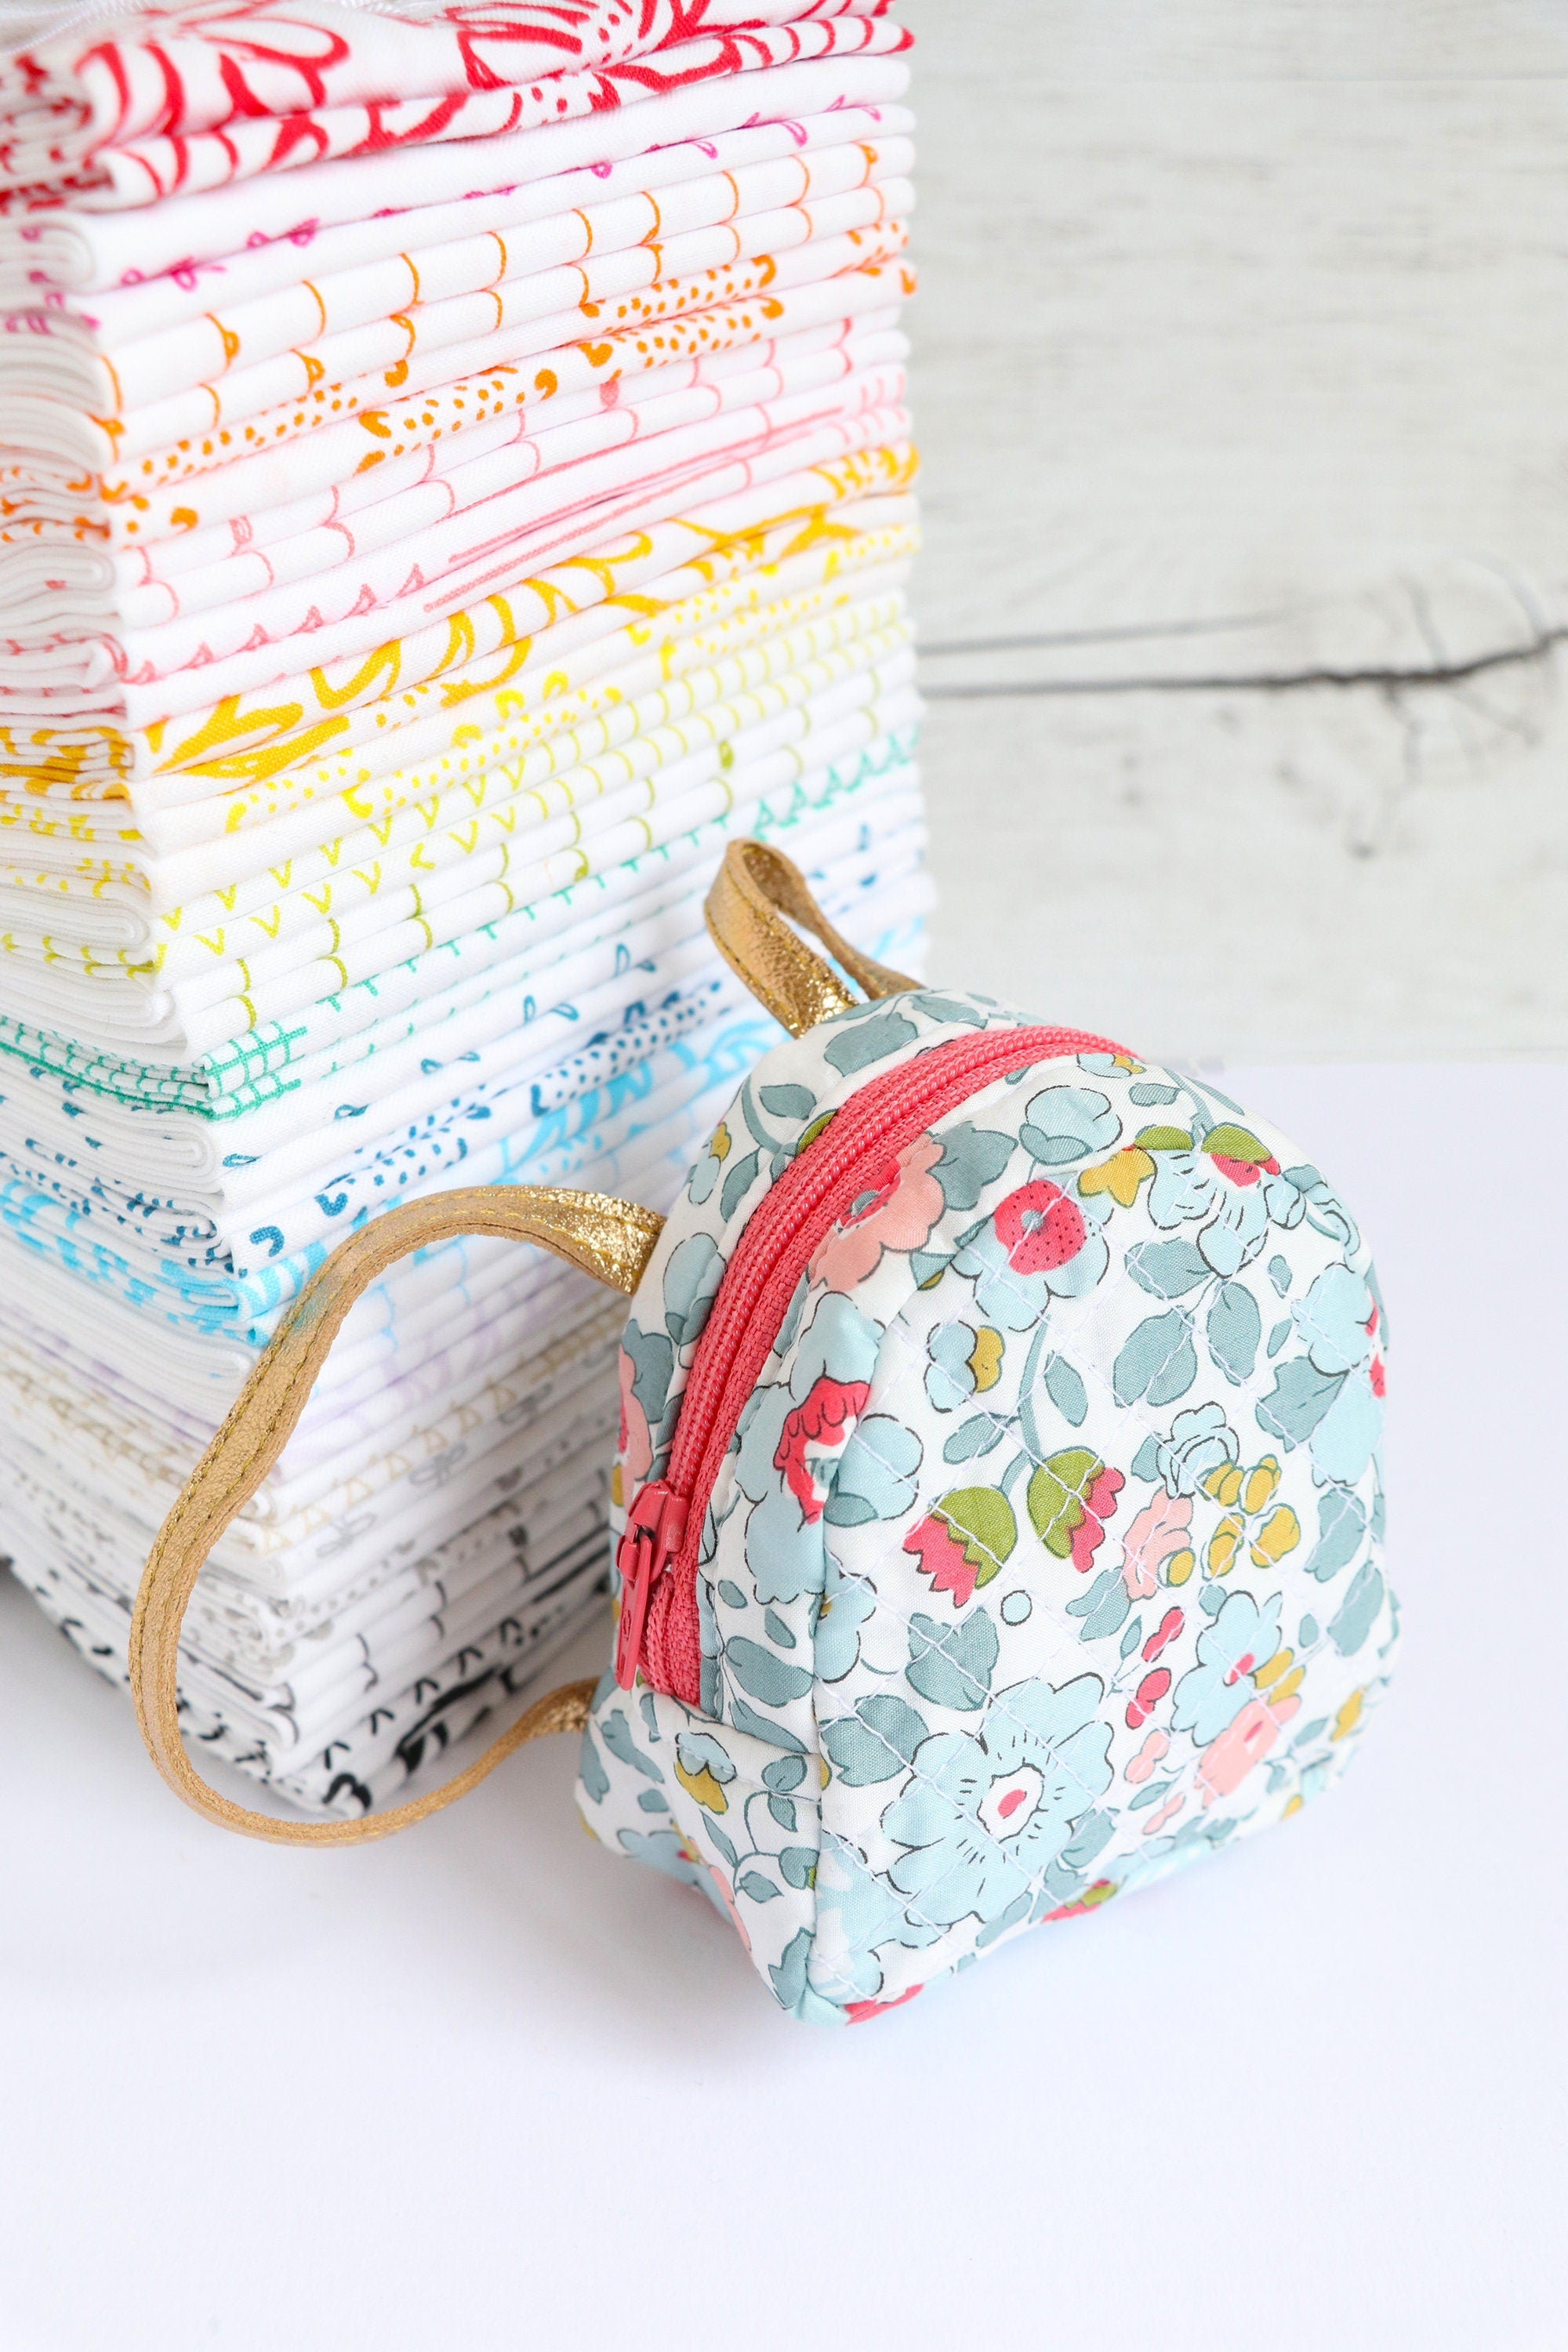 miniature backpack in Betsy Liberty fabric